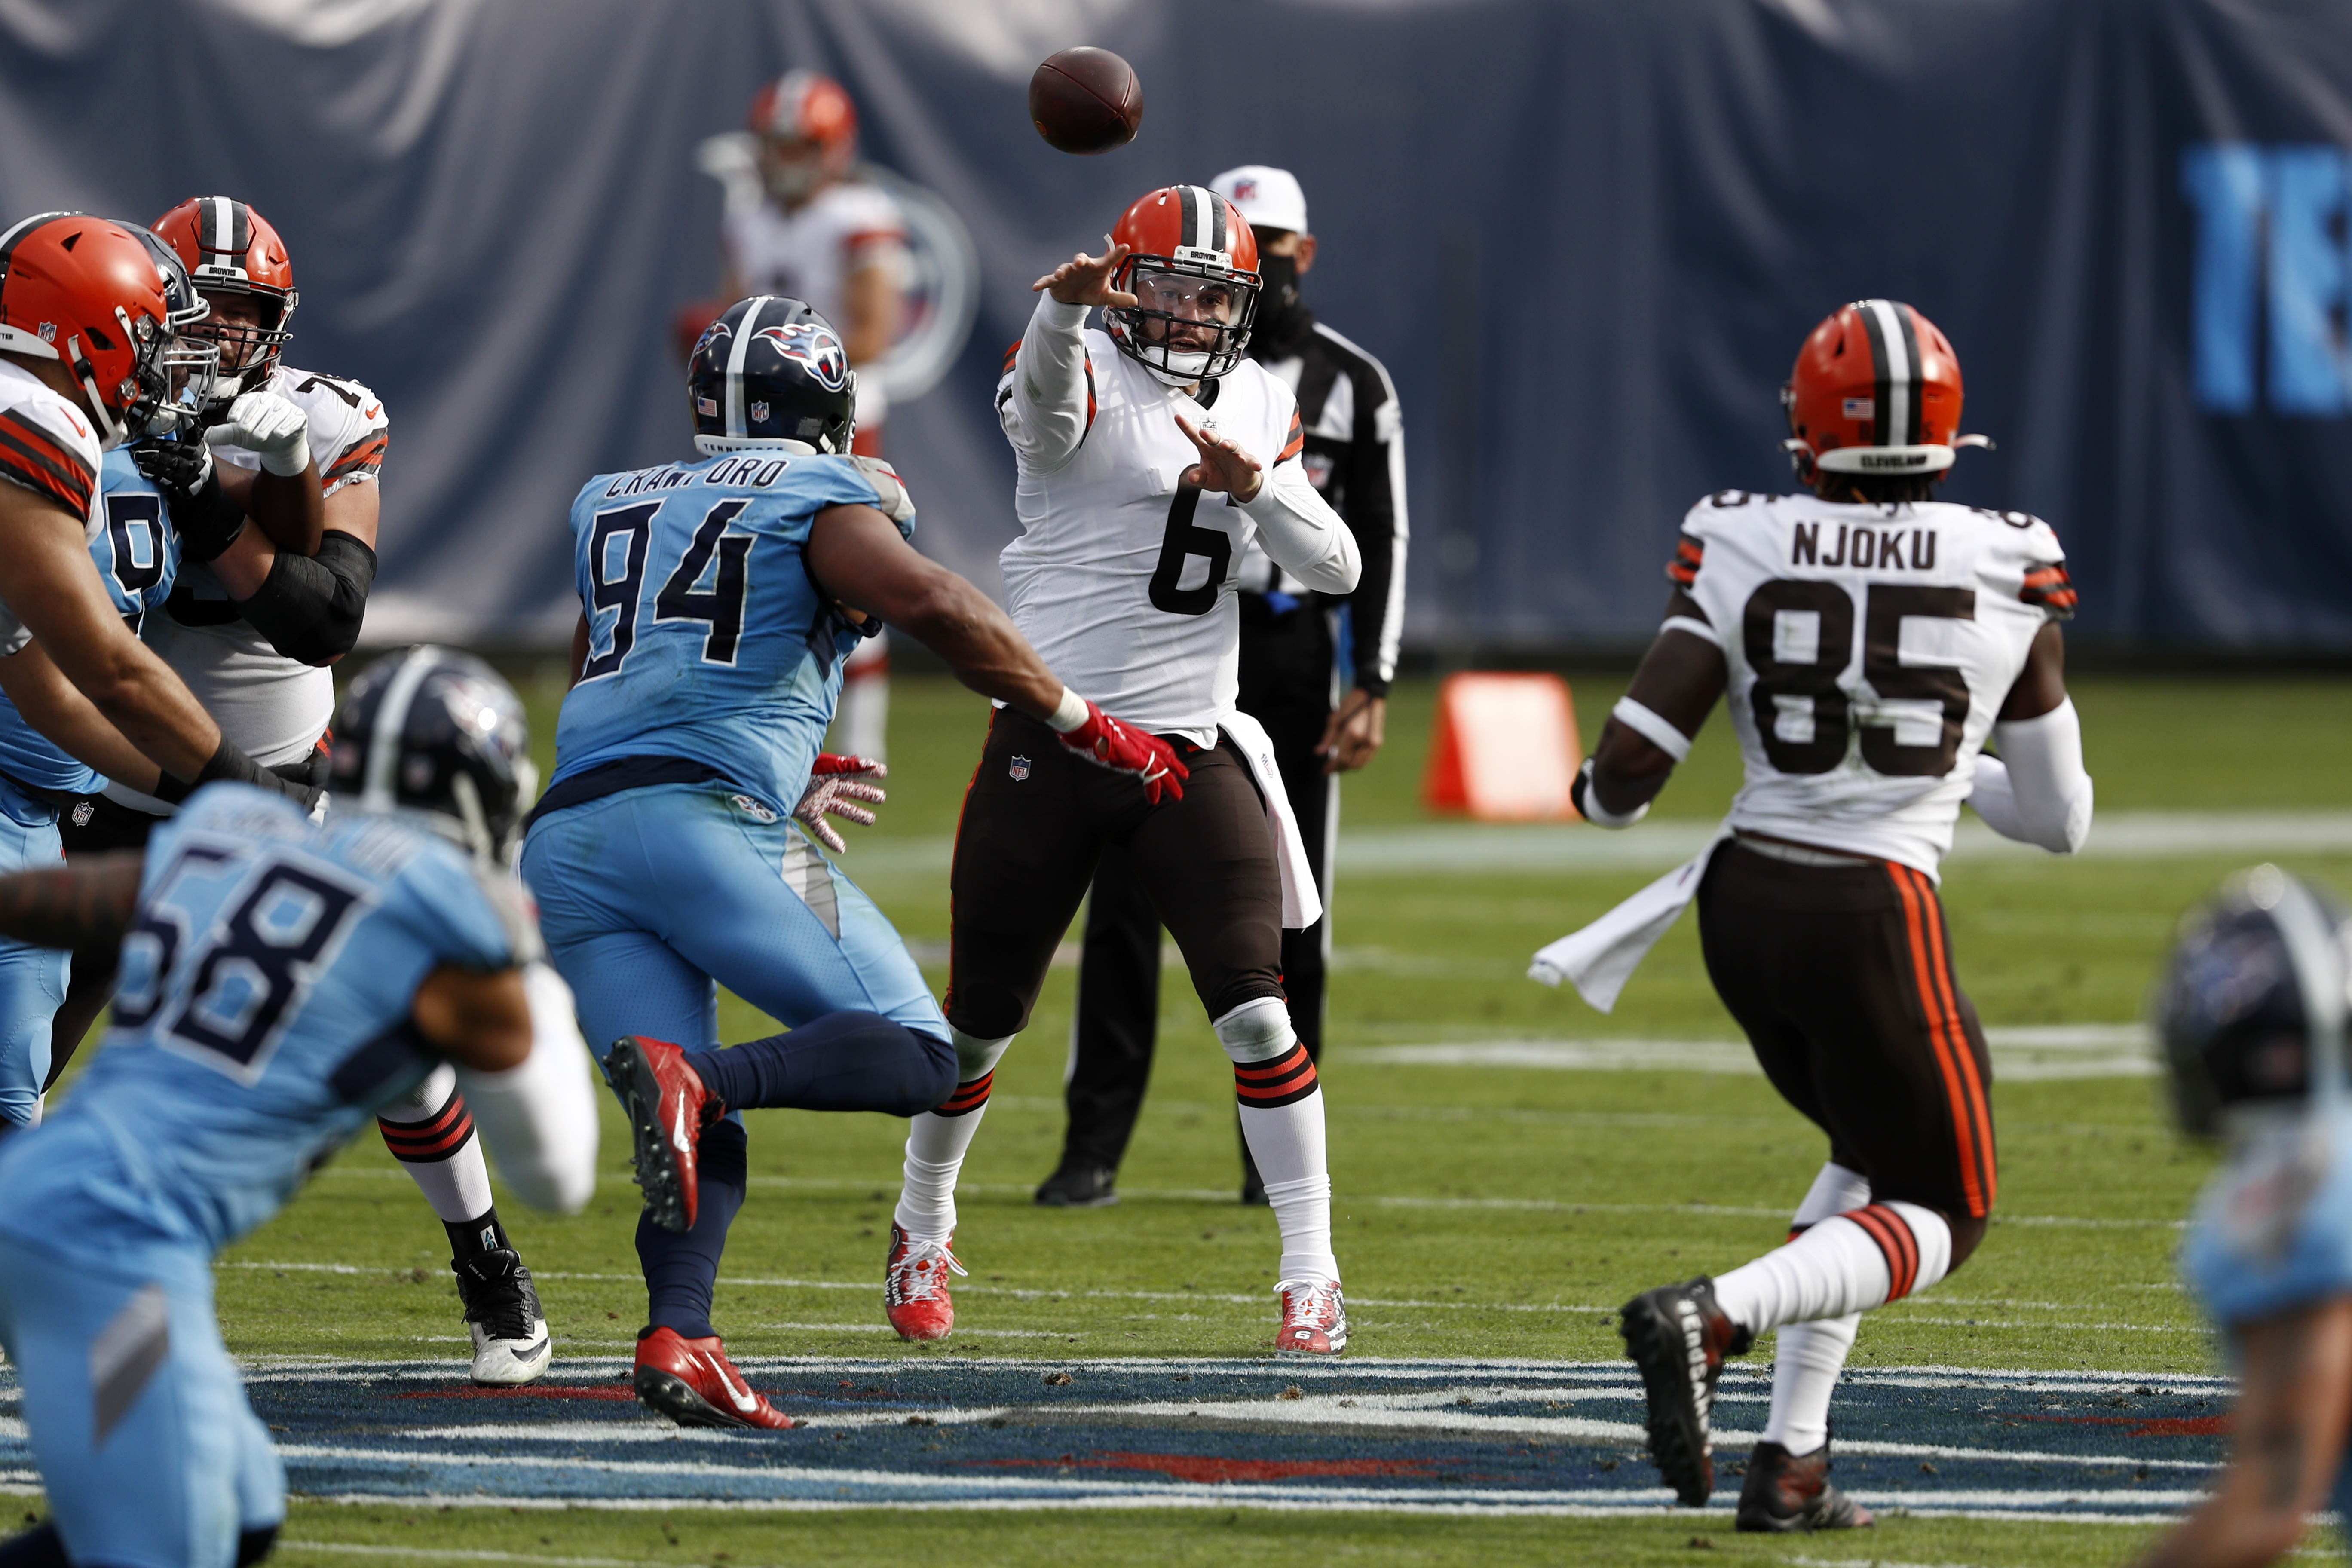 Bake Show: Baker Mayfield leads Cleveland Browns past Tennessee